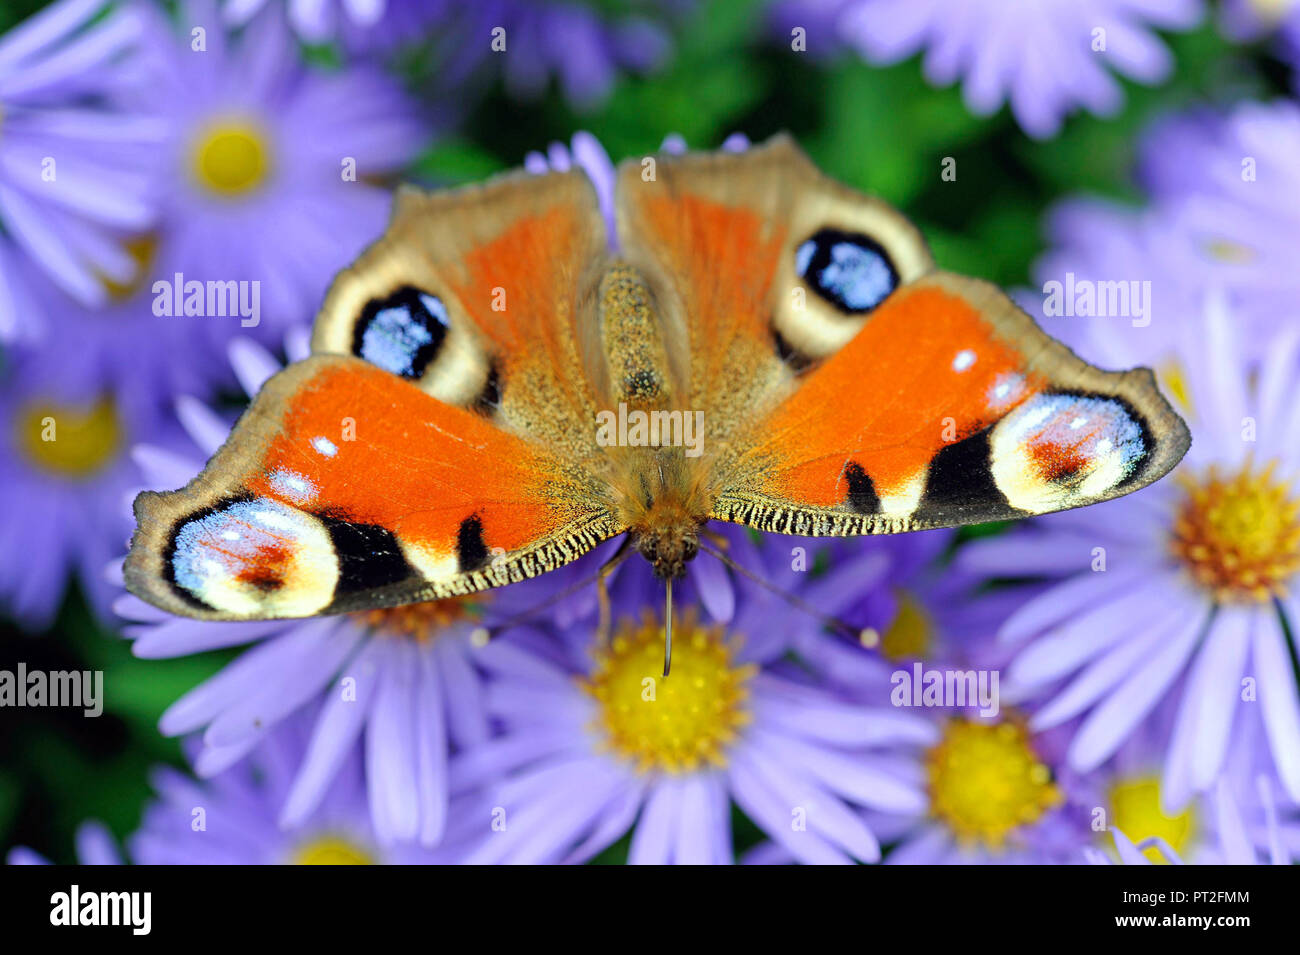 Peacock butterfly nibbling nectar on the flowers of wild chrysanthemum in the garden Stock Photo